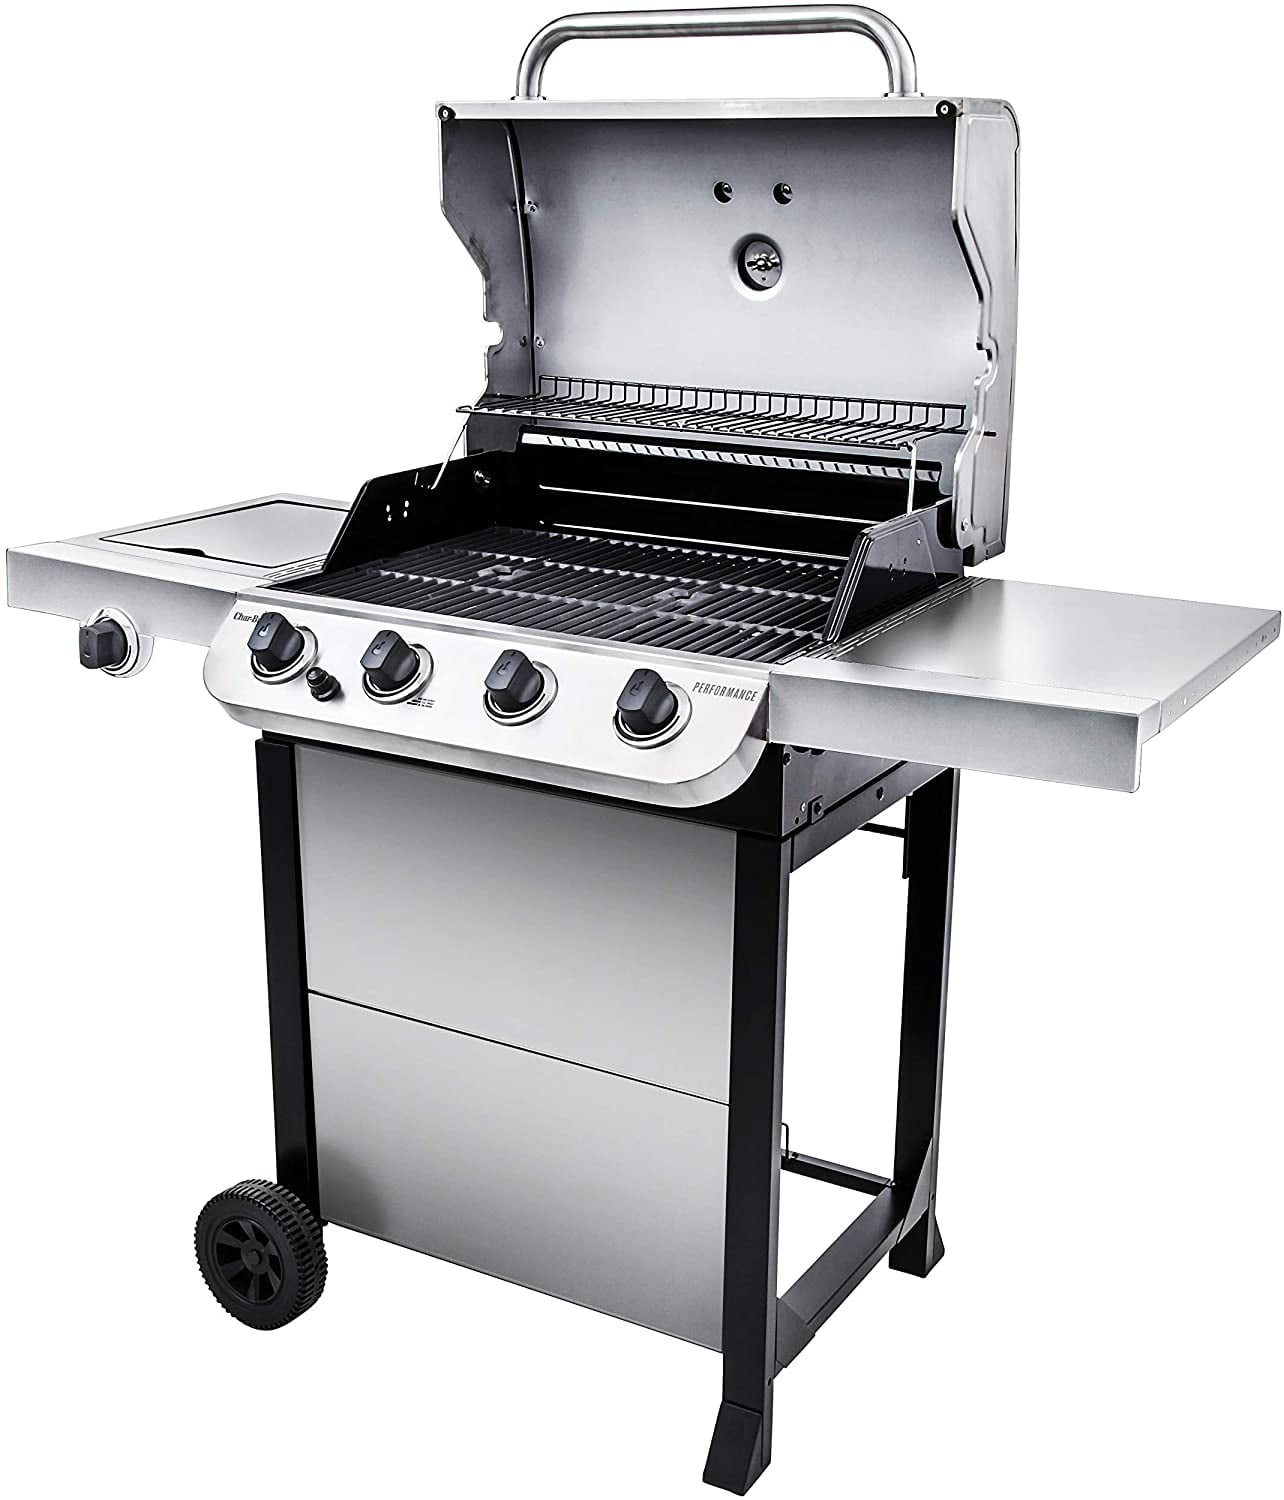 Char-Broil 463377319 Performance 4-Burner Cart Style Liquid Propane Gas Char Broil Stainless Steel Portable Liquid Propane Gas Grill